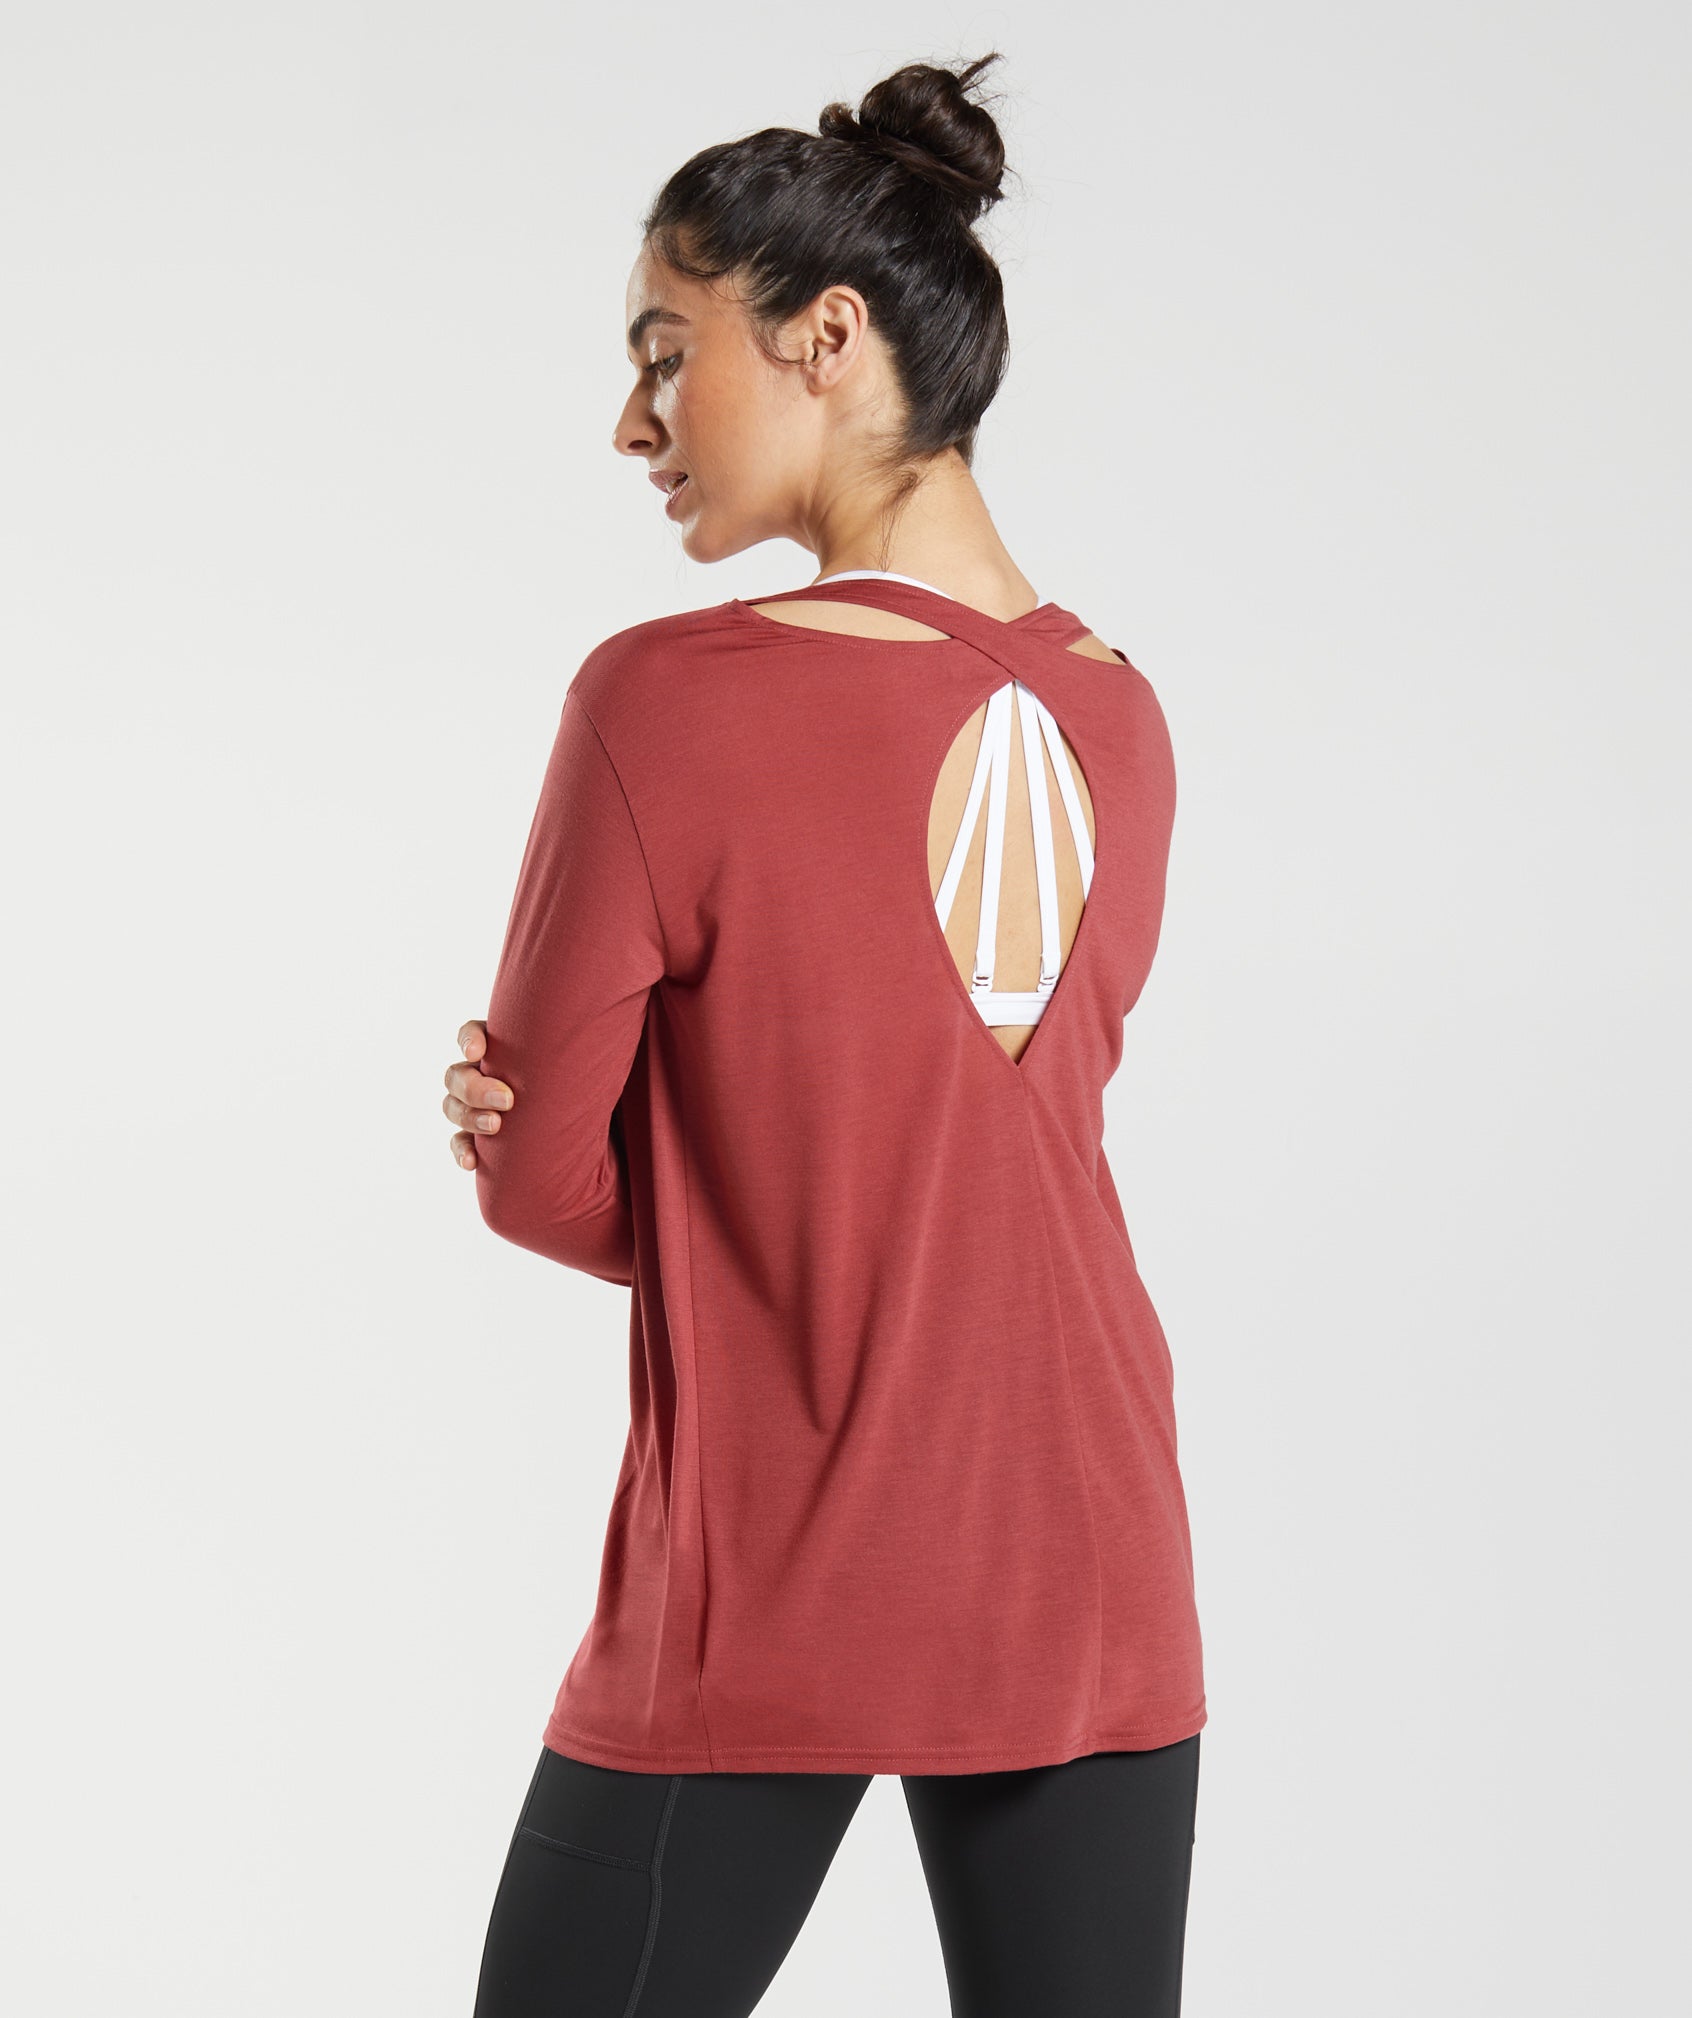 Super Soft Cut-Out Long Sleeve Top in Pomegranate Red - view 2